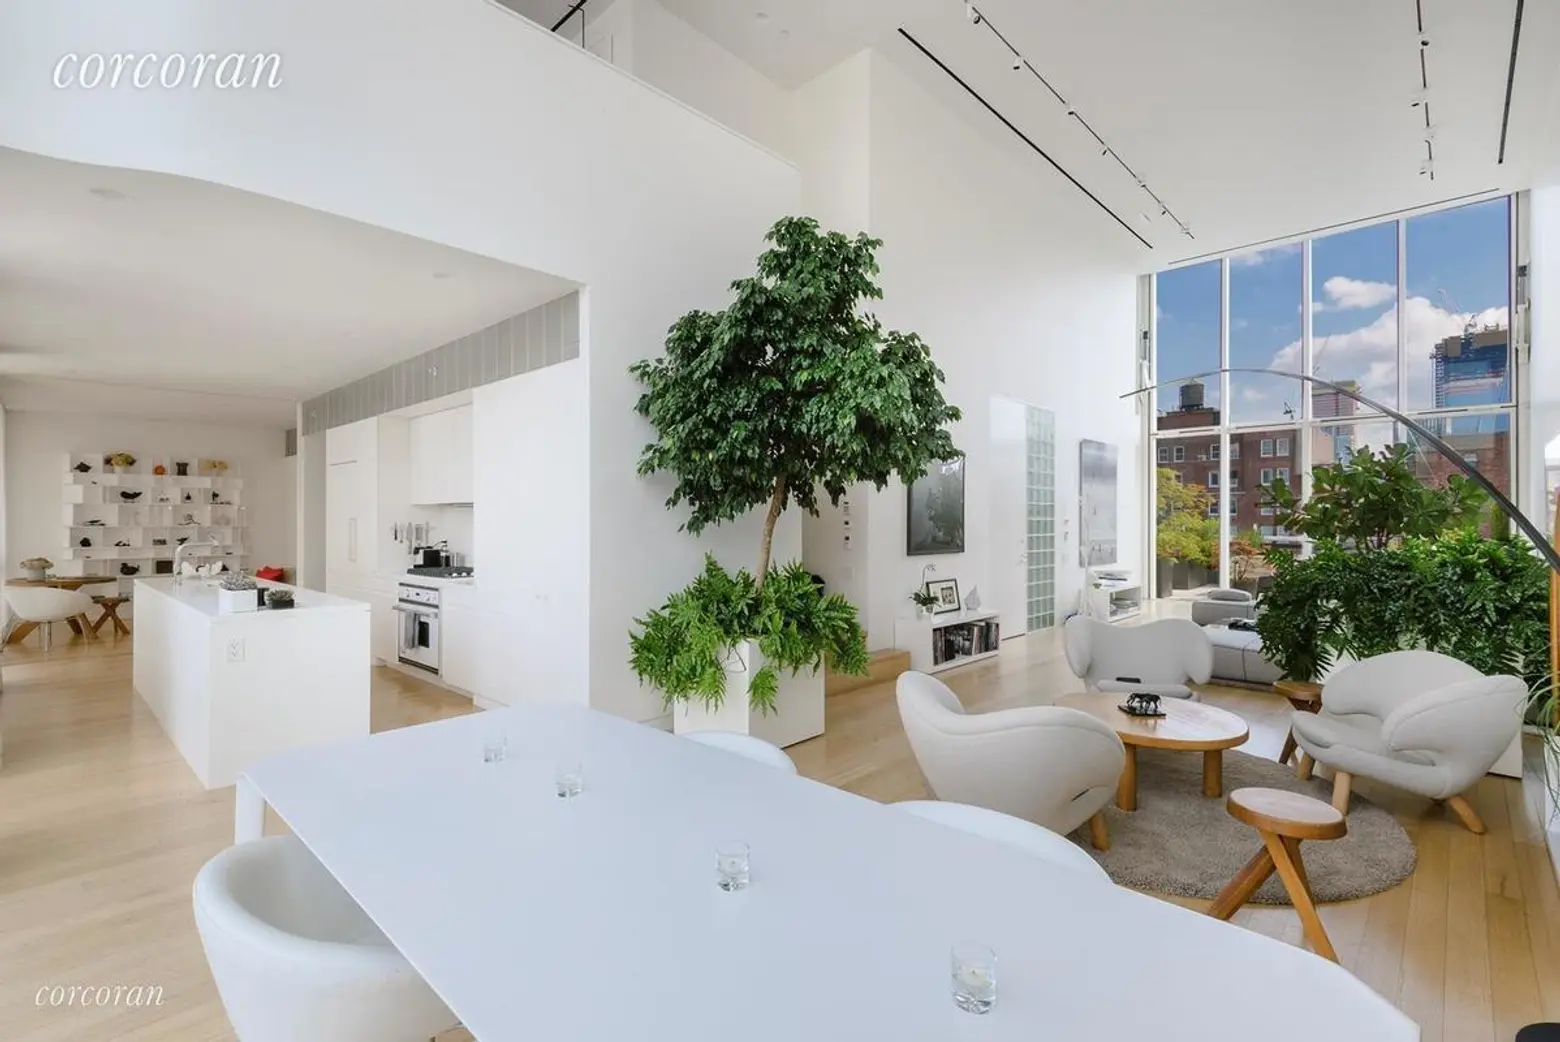 The penthouse at Shigeru Ban’s Metal Shutter Houses tries its hand as a $25K/month rental